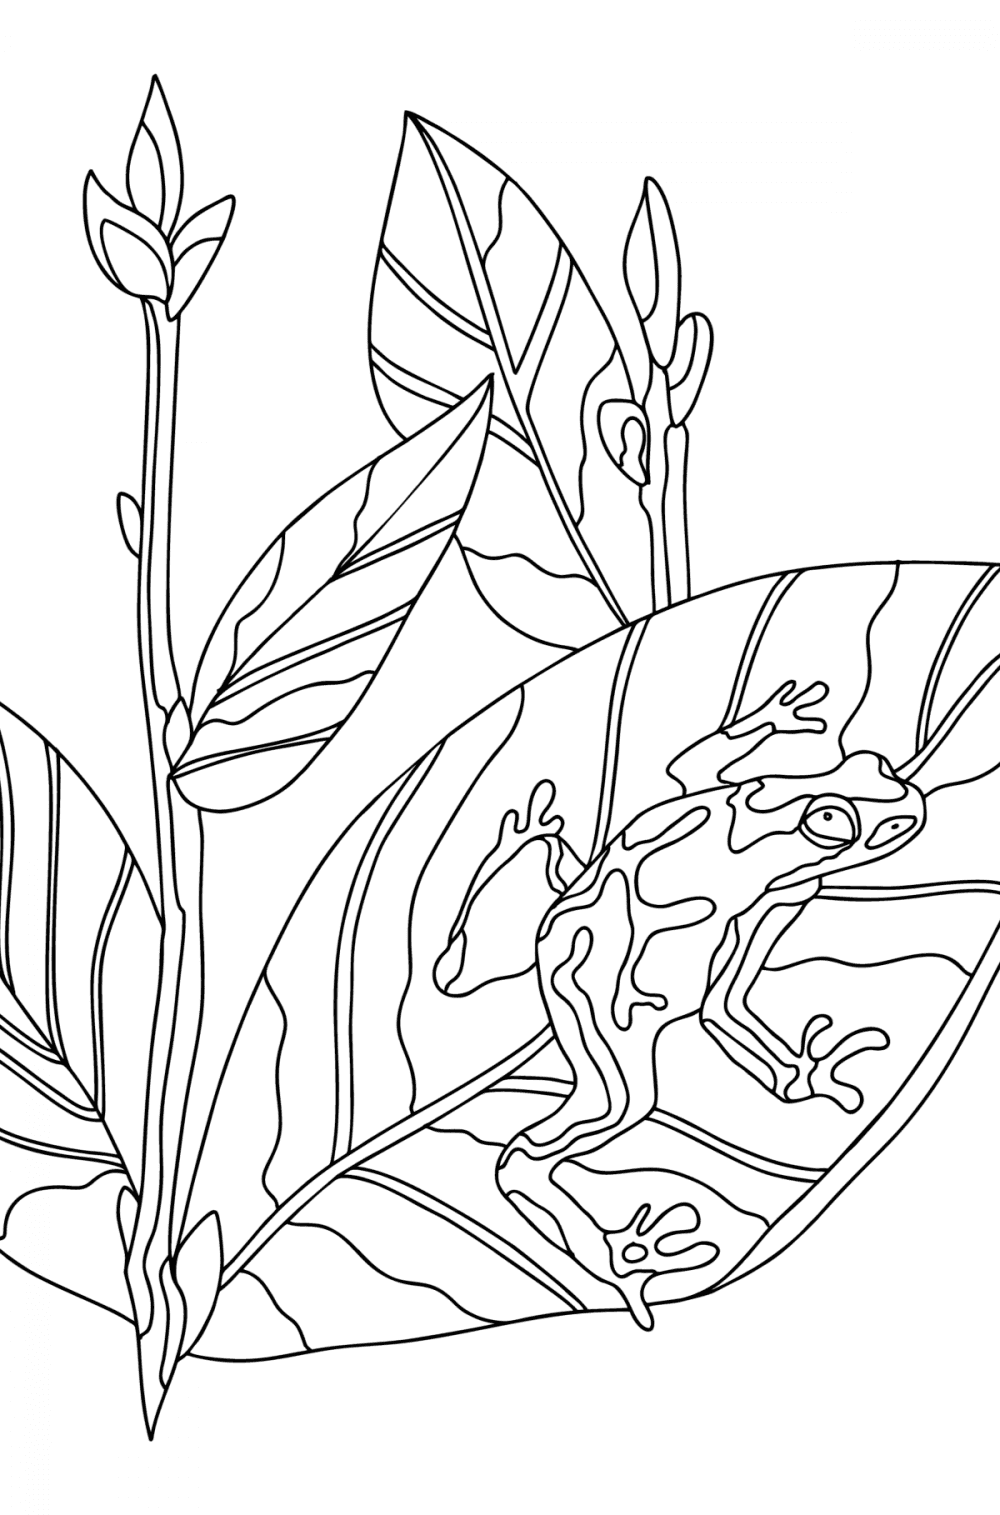 Frogs Coloring Pages - Download, Print, and Color Online!